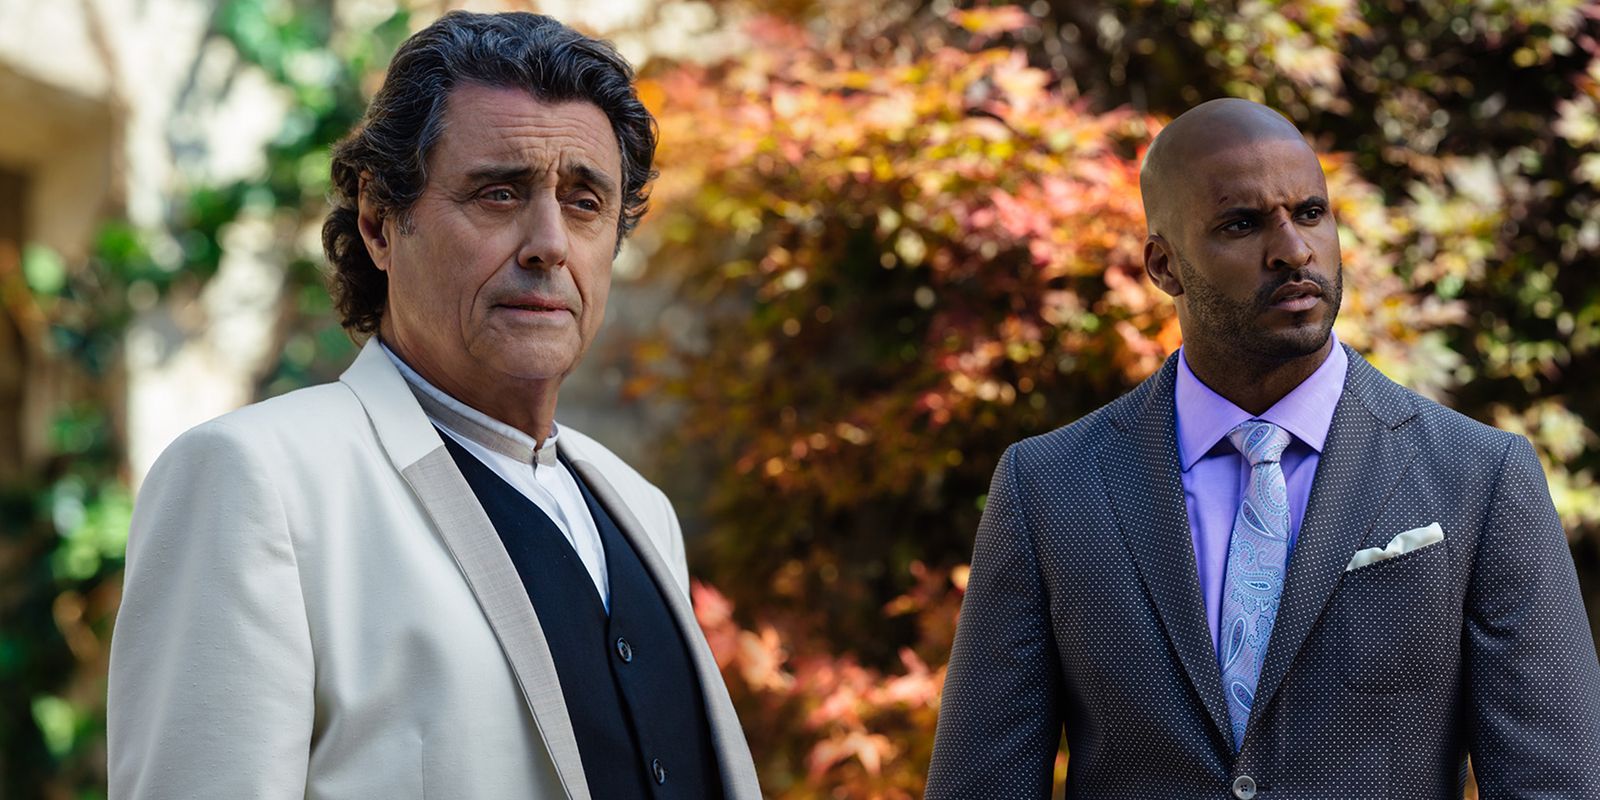 Ian McShane and Ricky Whittle in American Gods Season 1 Episode 8